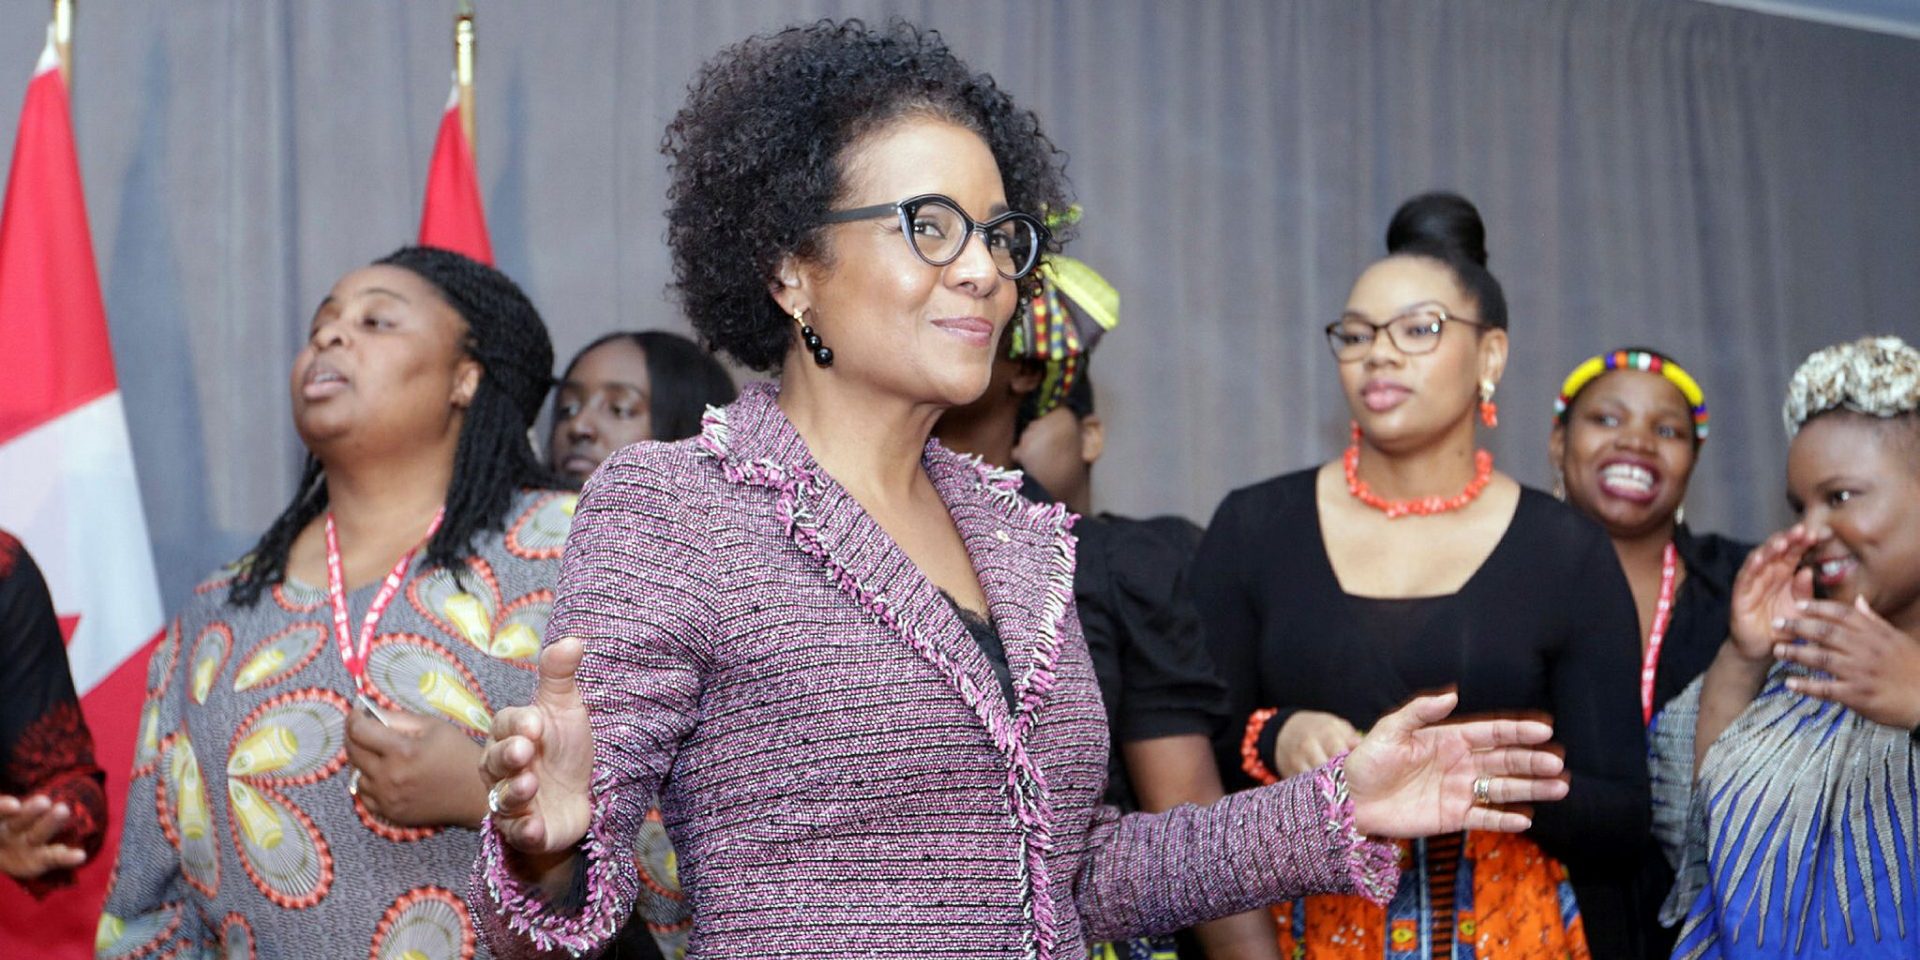 Former governor general Michaëlle Jean attends a Black History Month celebration in Ottawa on Feb. 4, 2019. Sam Garcia